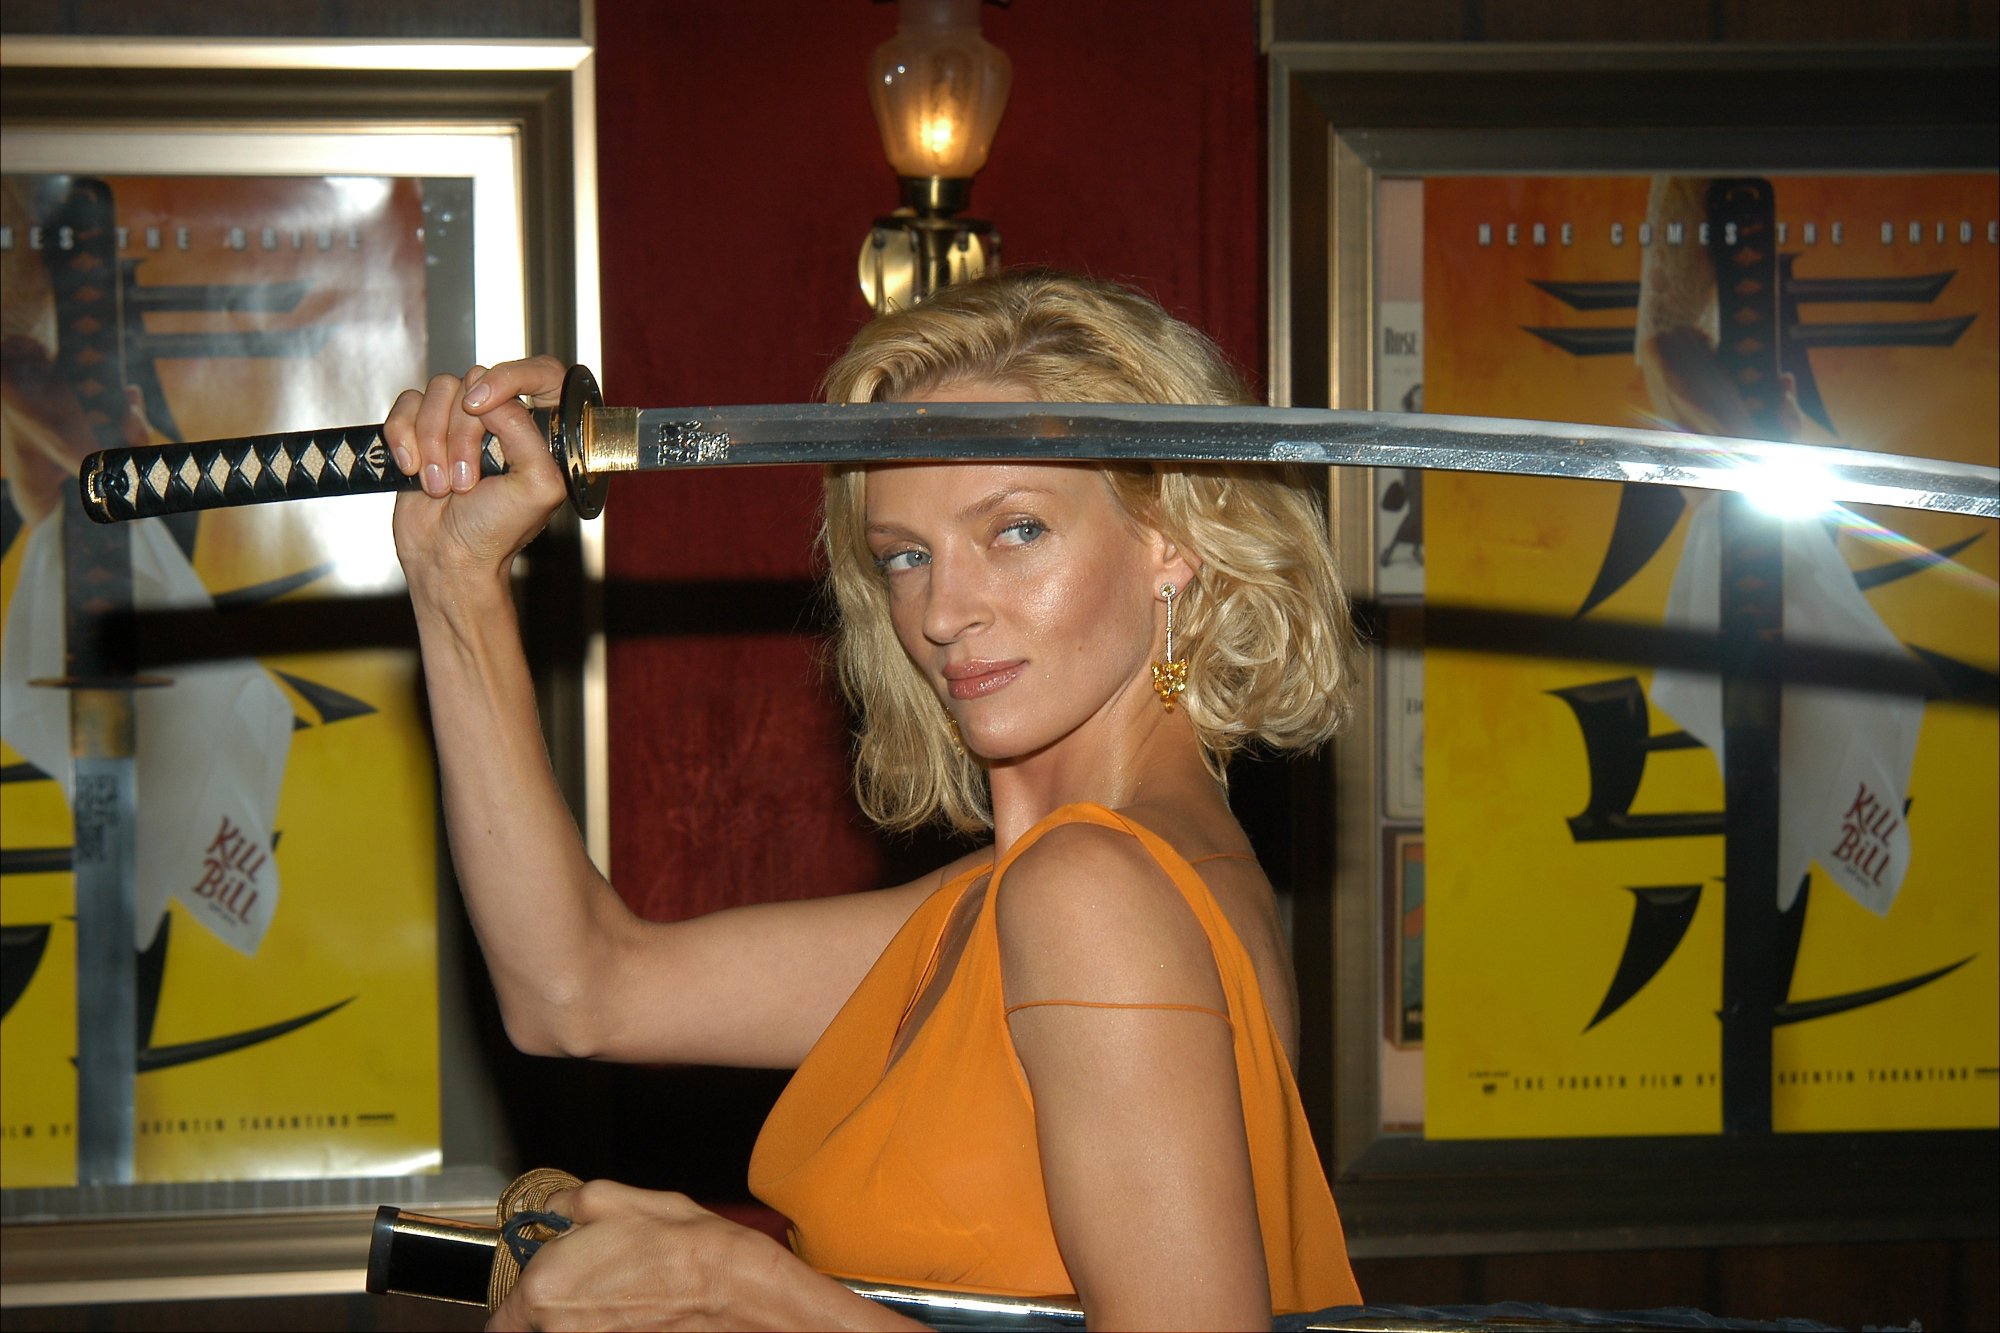 'Kill Bill' star Uma Thurman holding a samurai sword in front of the movie posters